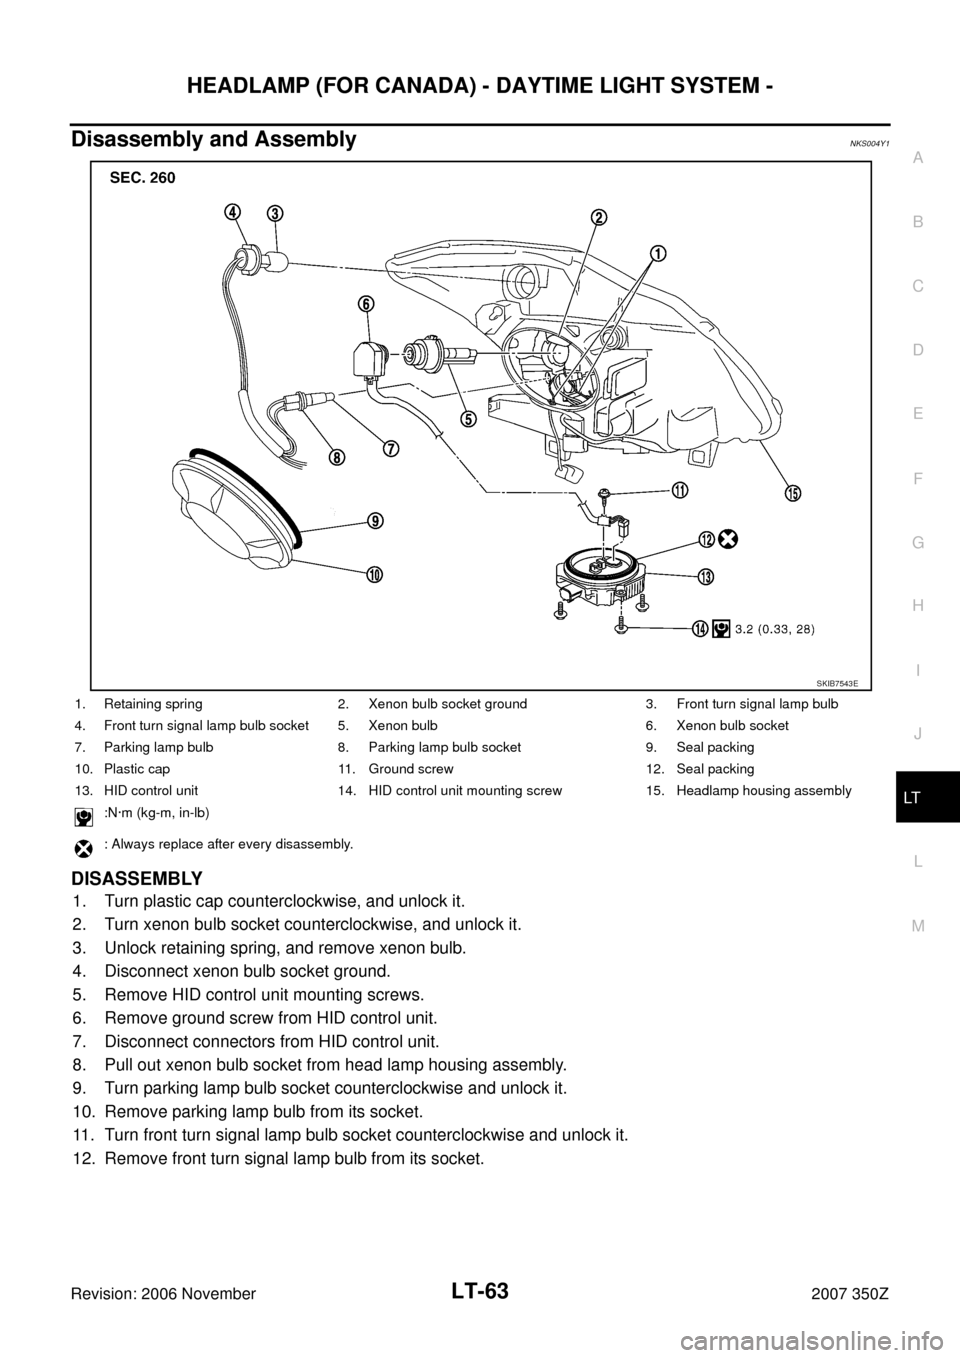 NISSAN 350Z 2007 Z33 Lighting System Repair Manual HEADLAMP (FOR CANADA) - DAYTIME LIGHT SYSTEM -
LT-63
C
D
E
F
G
H
I
J
L
MA
B
LT
Revision: 2006 November2007 350Z
Disassembly and Assembly NKS004Y1
DISASSEMBLY
1. Turn plastic cap counterclockwise, and 